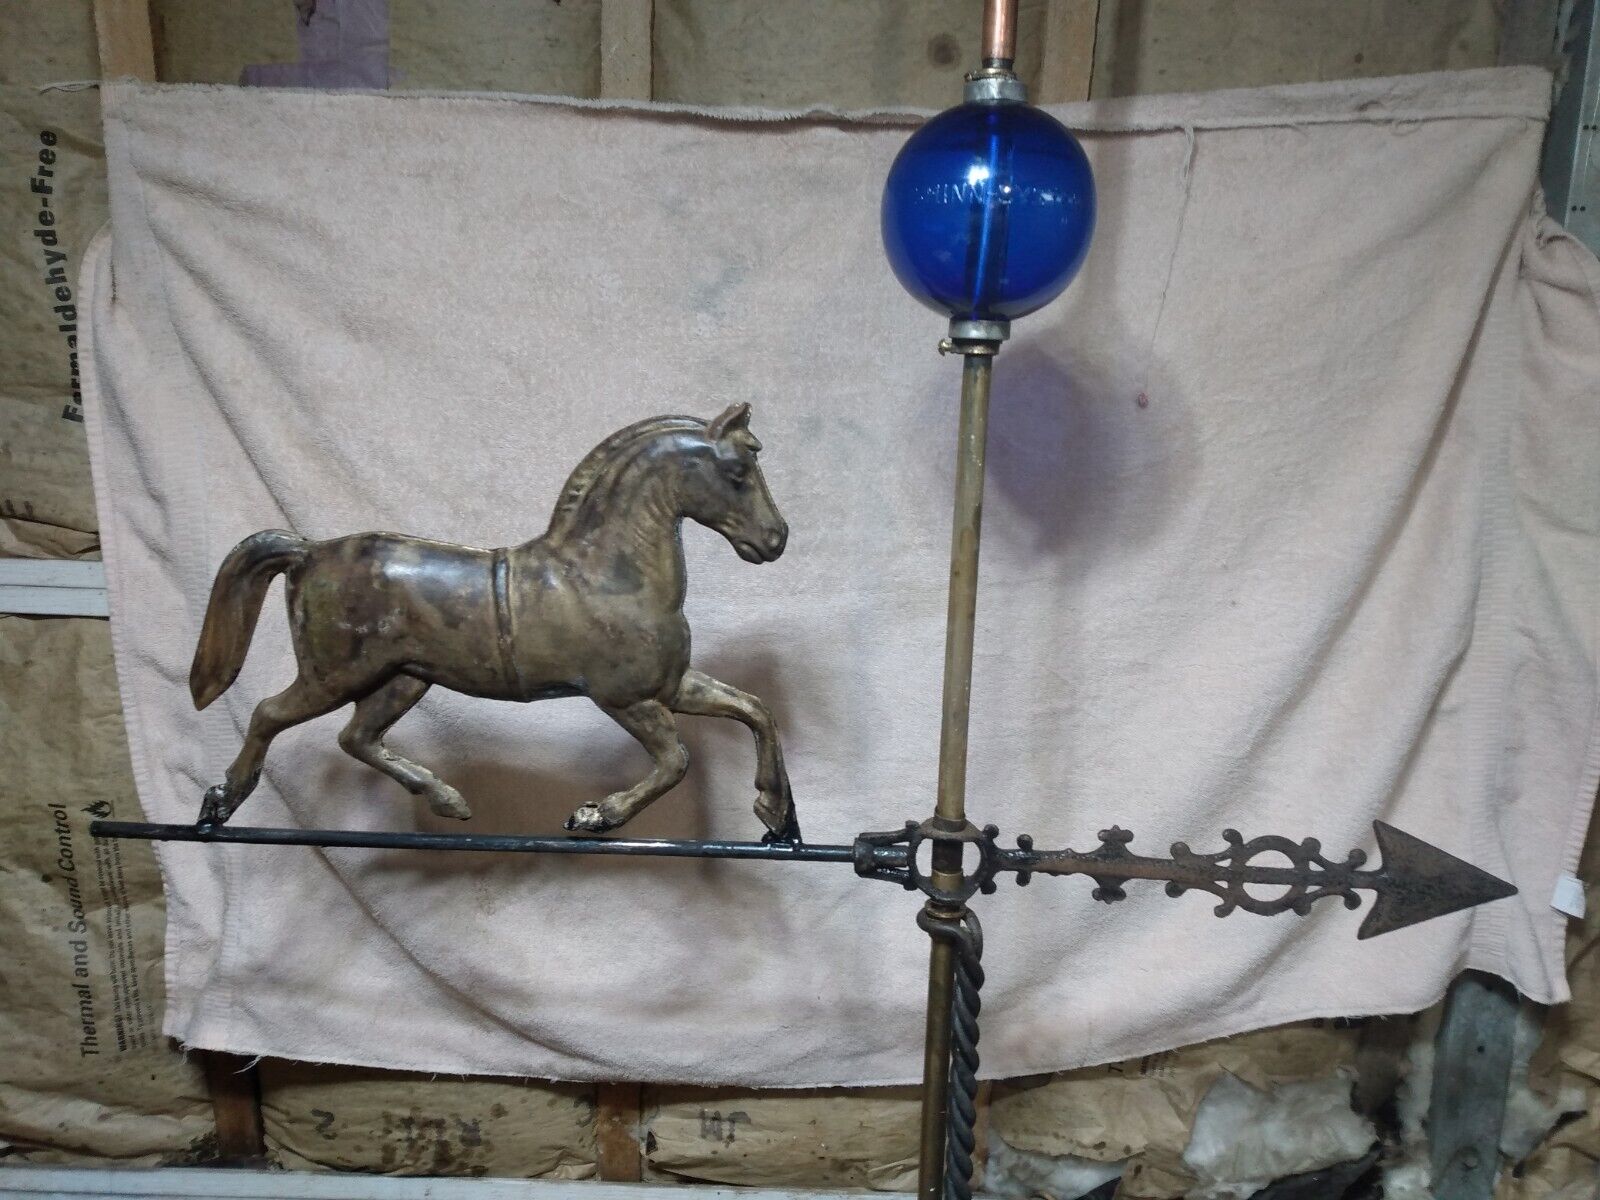 Antq. Hollow Trotting Horse Weather Vane With Shill-System Colbalt Blue Ball